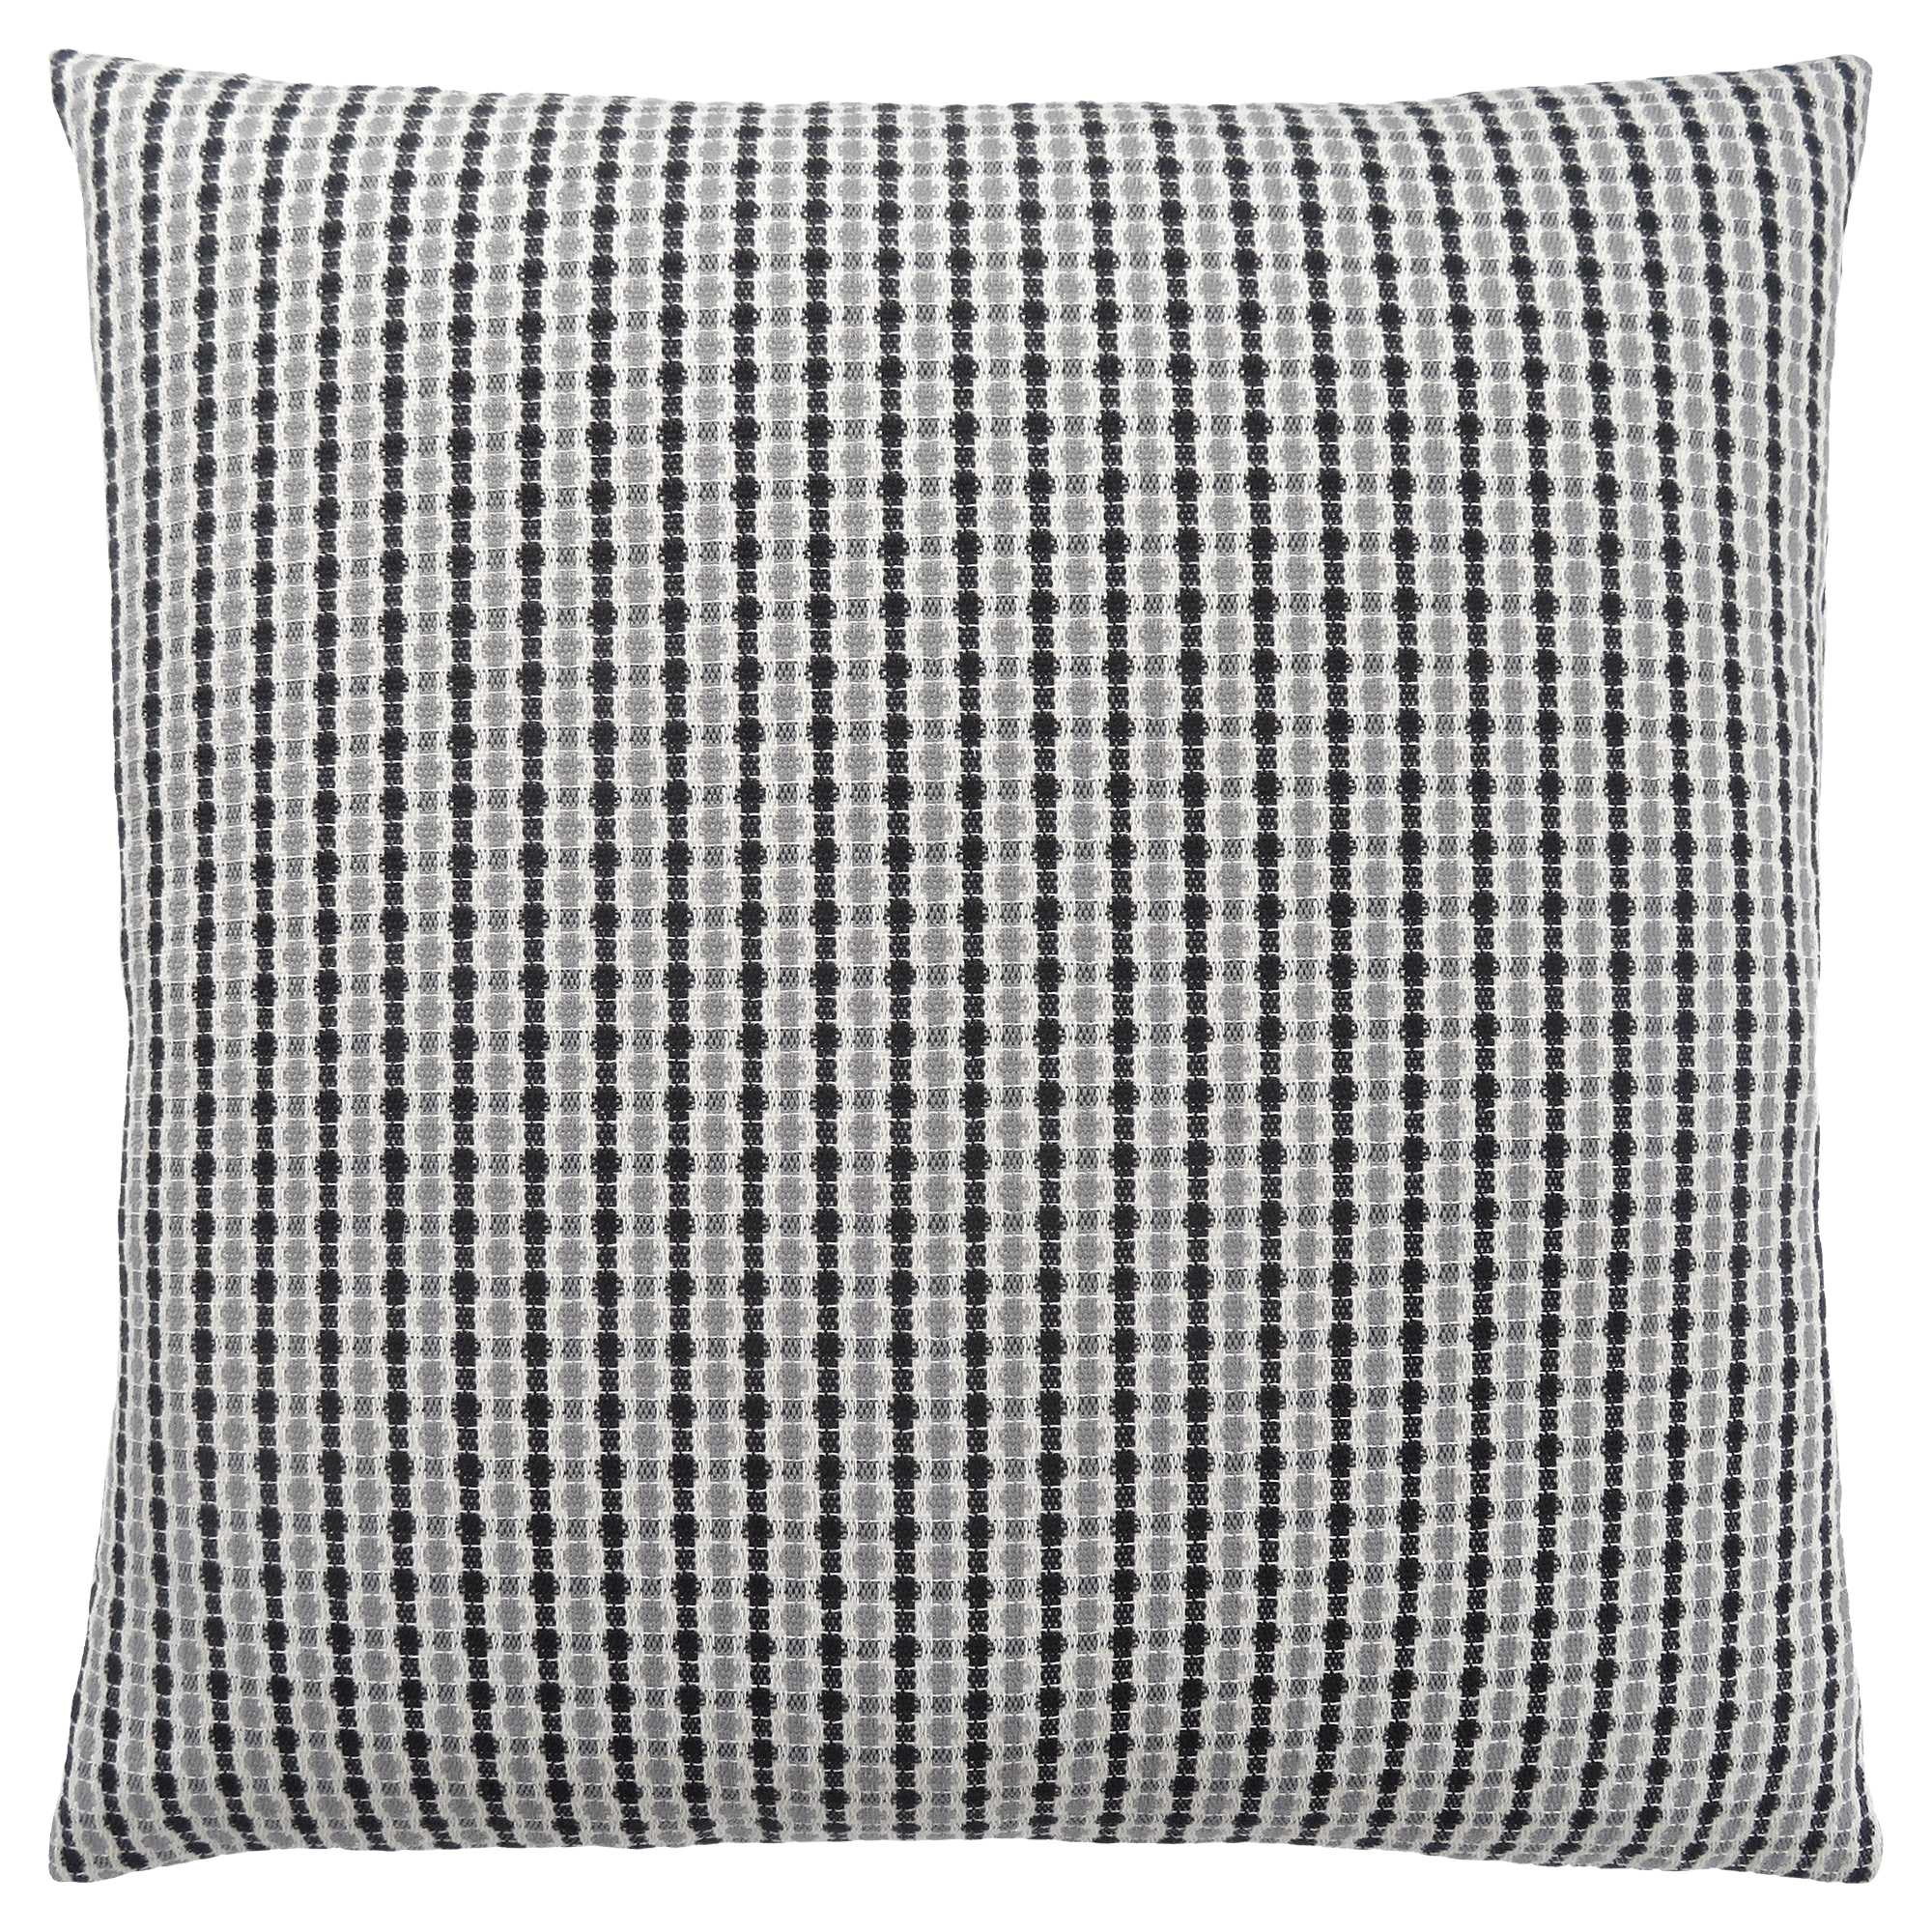 18" X 18" Black Gray and White Polyester Striped Zippered Pillow-344021-1